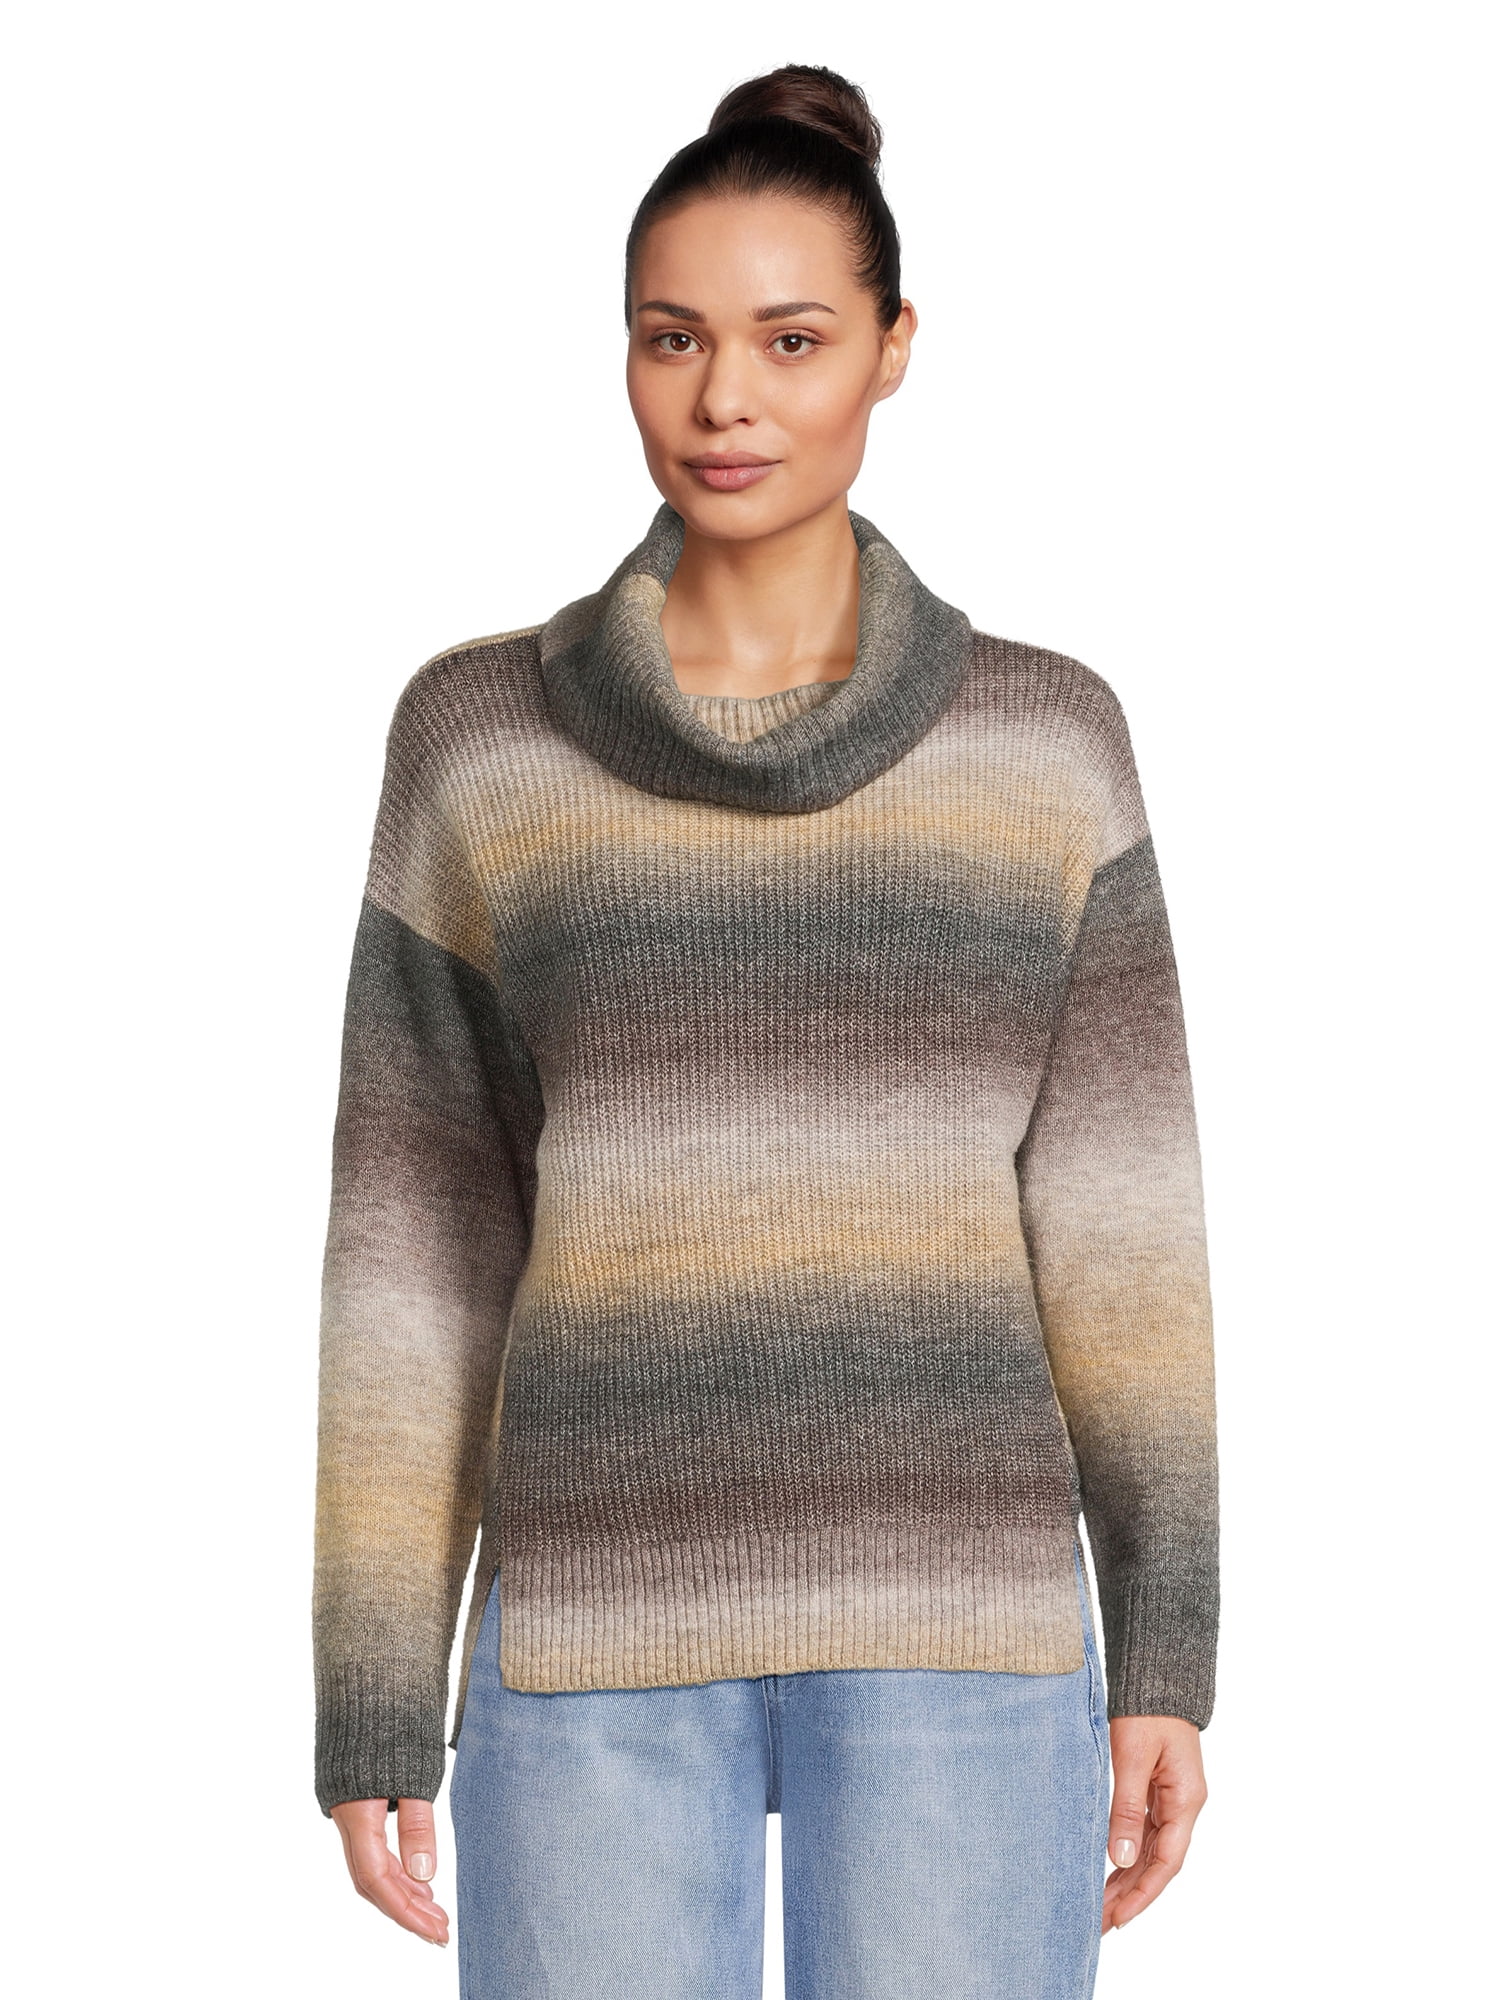 Time and Tru Women's Ombre Cowl Neck Sweater, Midweight, Sizes XS-XXXL ...